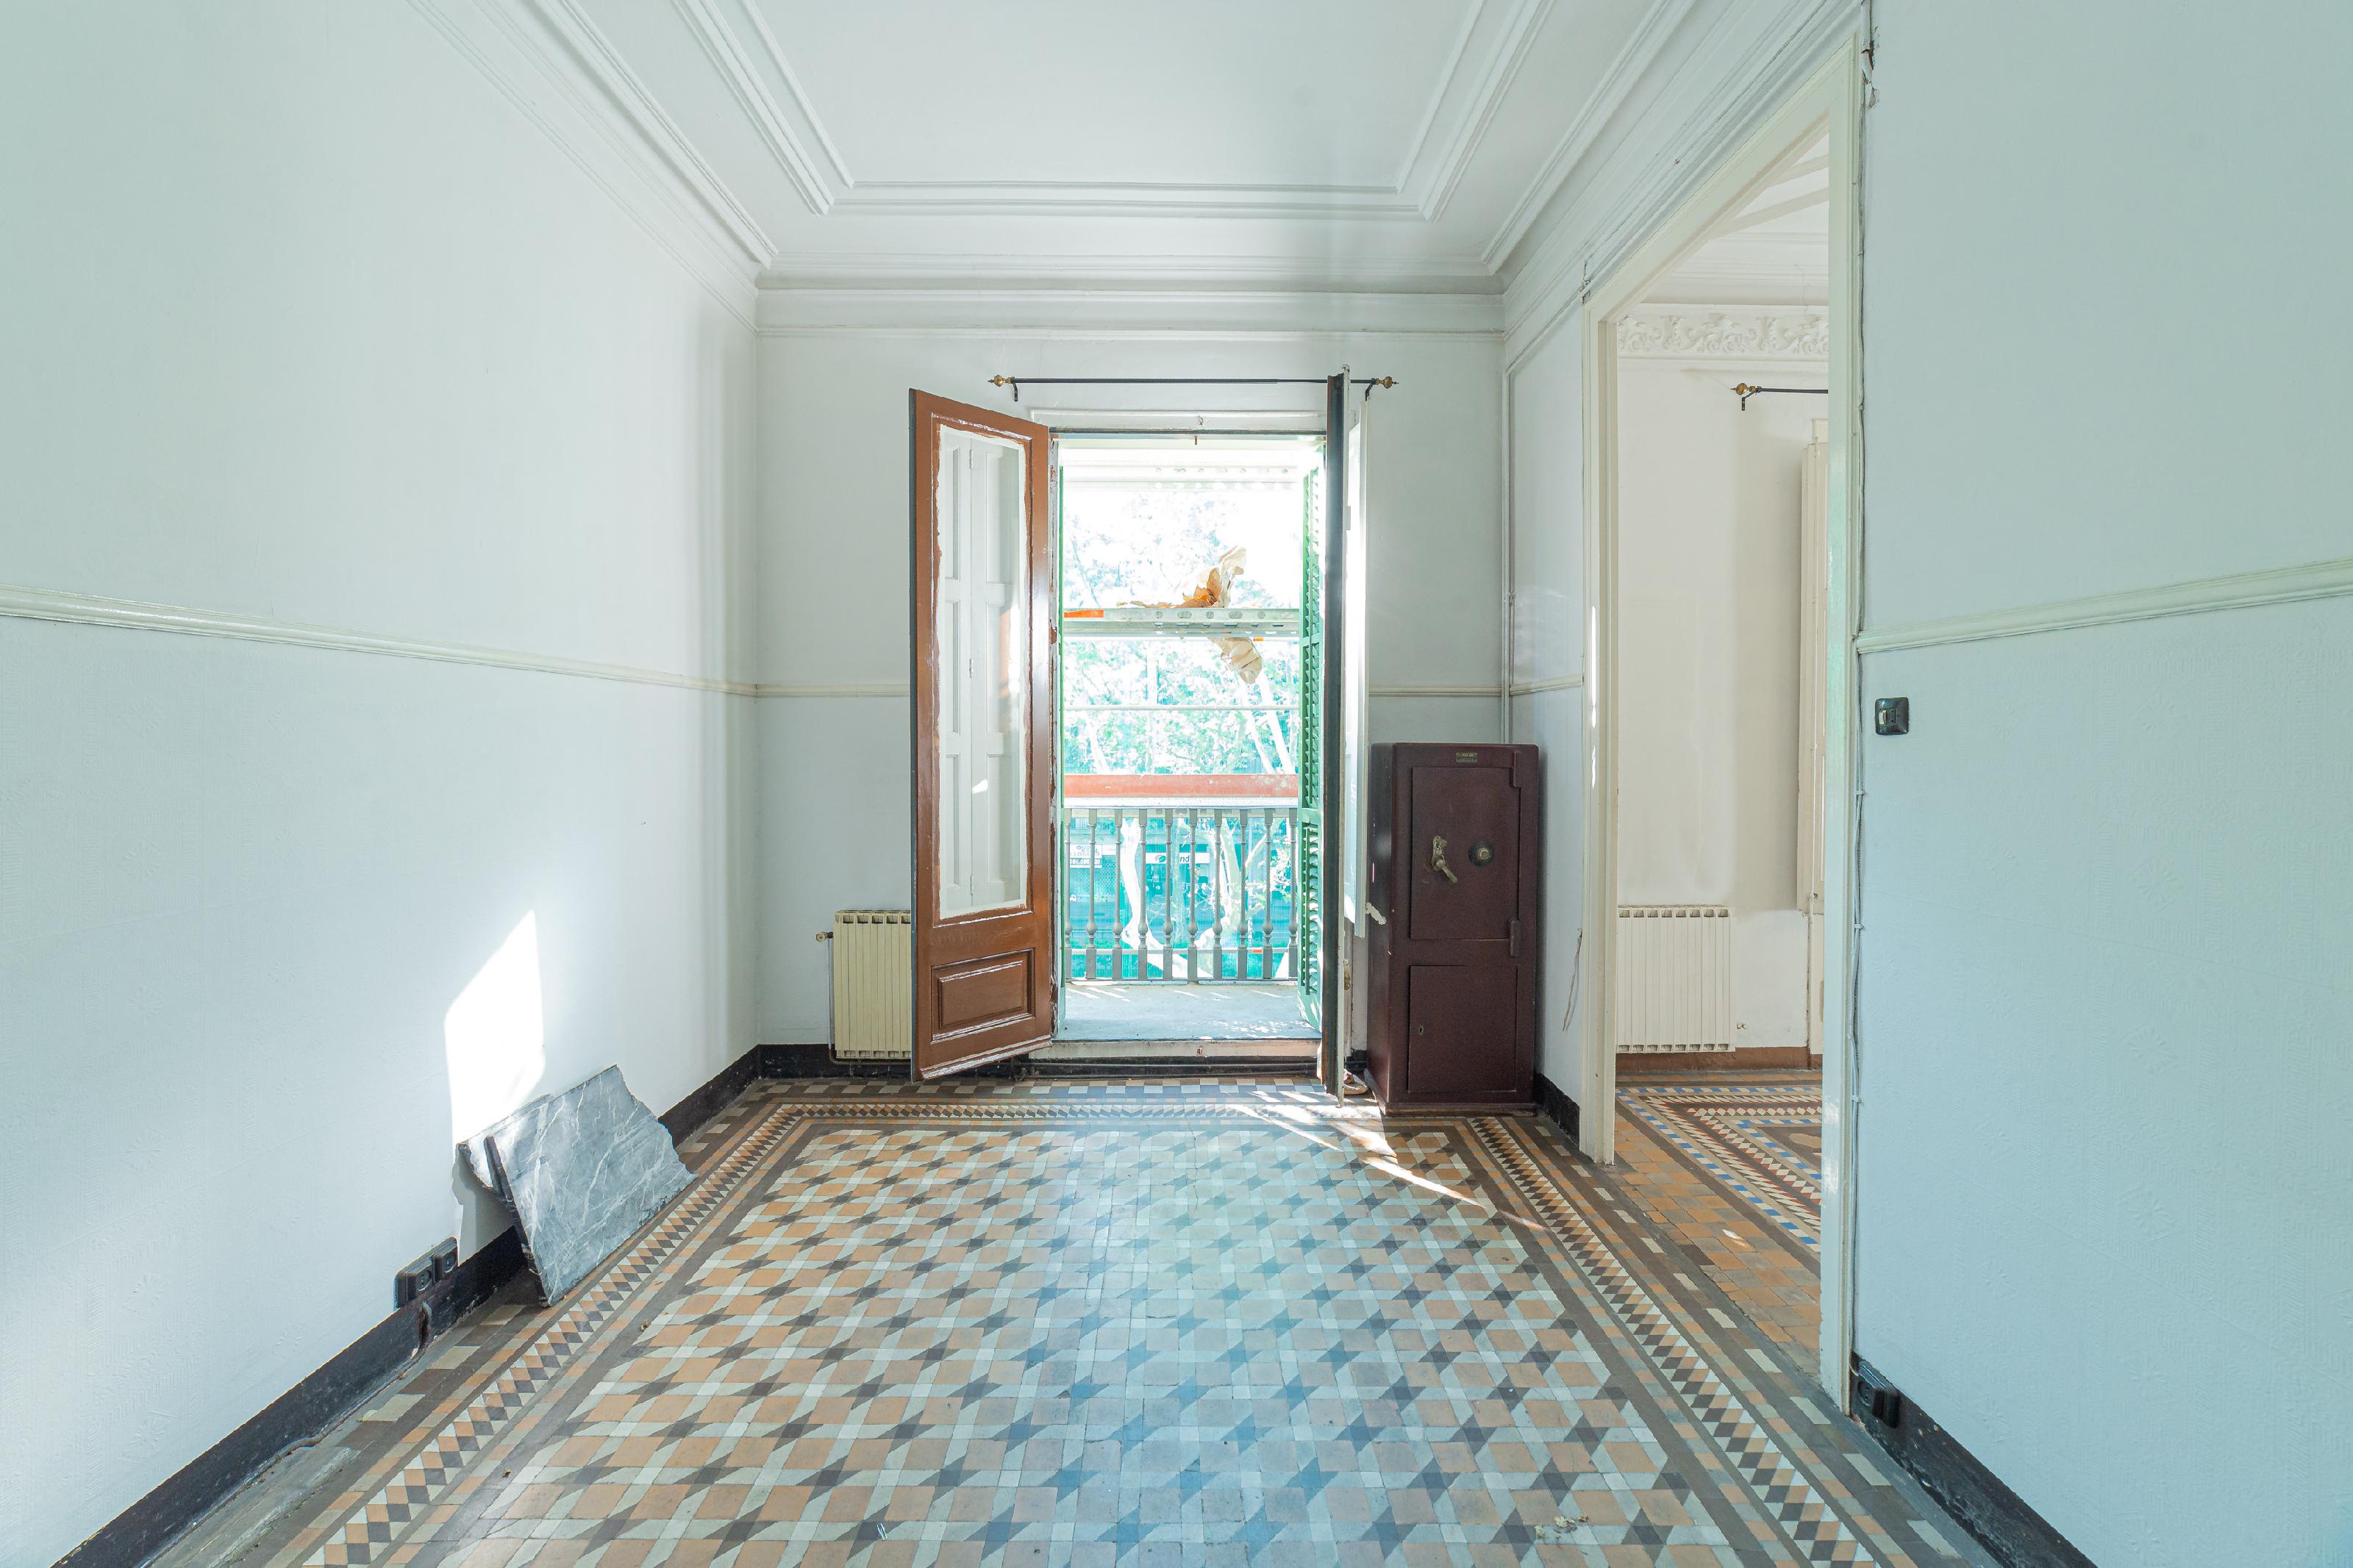 273416 Flat for sale in Eixample, Old Esquerre Eixample 2